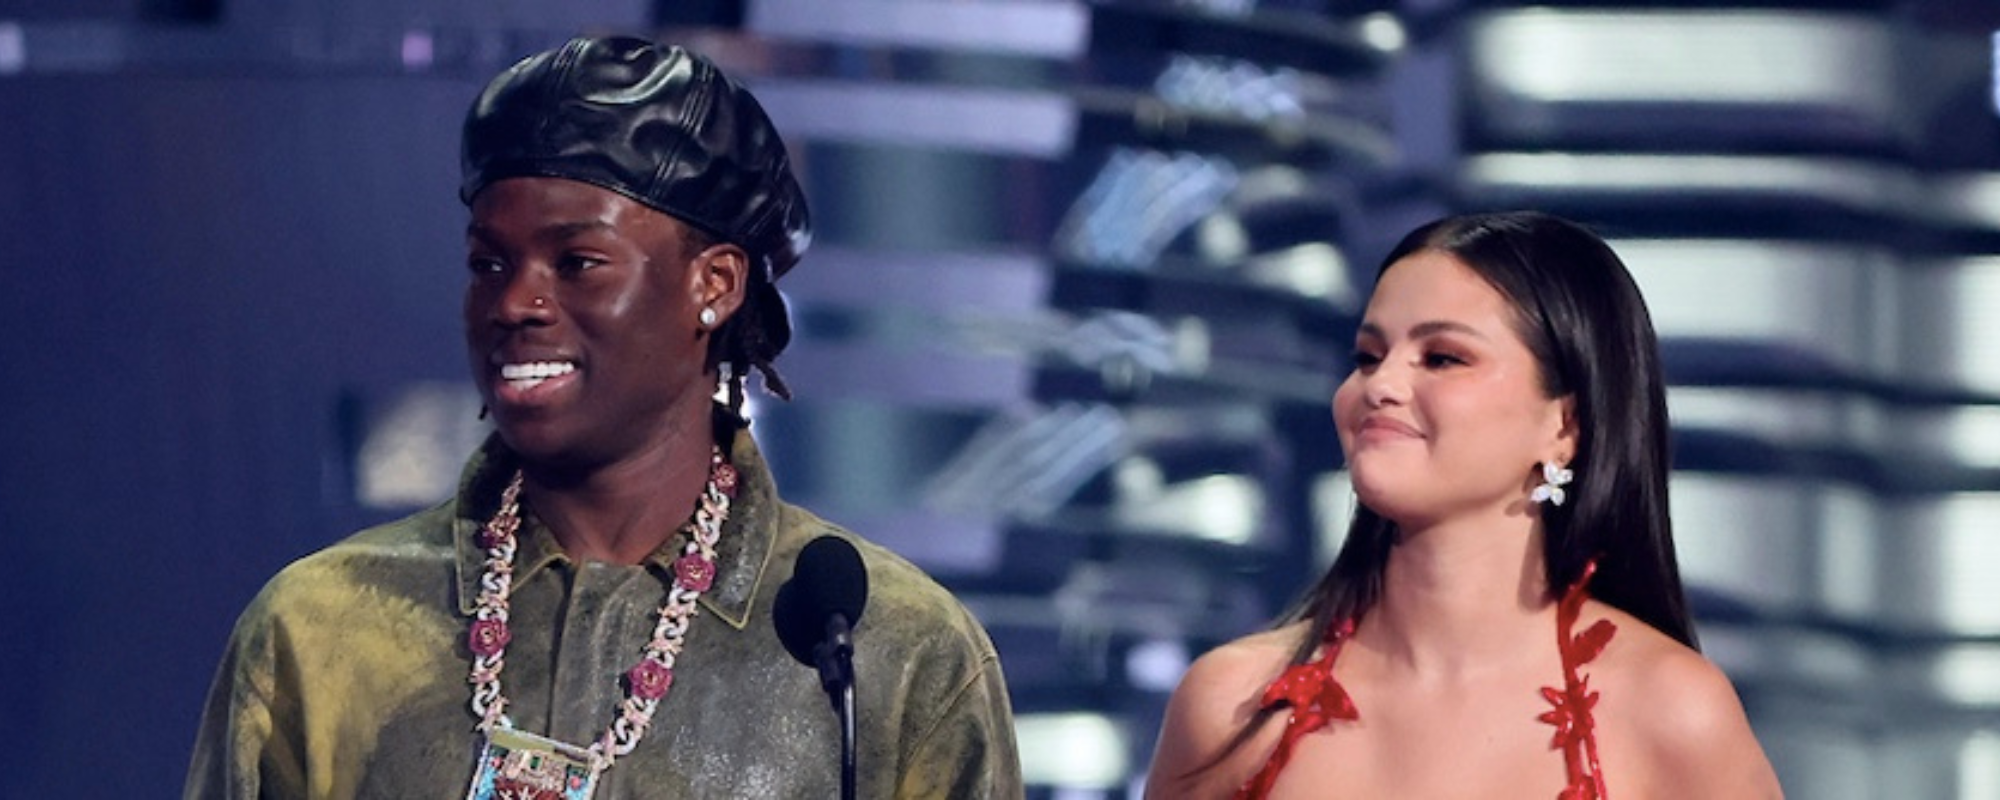 Selena Gomez and Rema Accept Award for Top Afrobeats Song for “Calm Down” at Billboard Music Awards